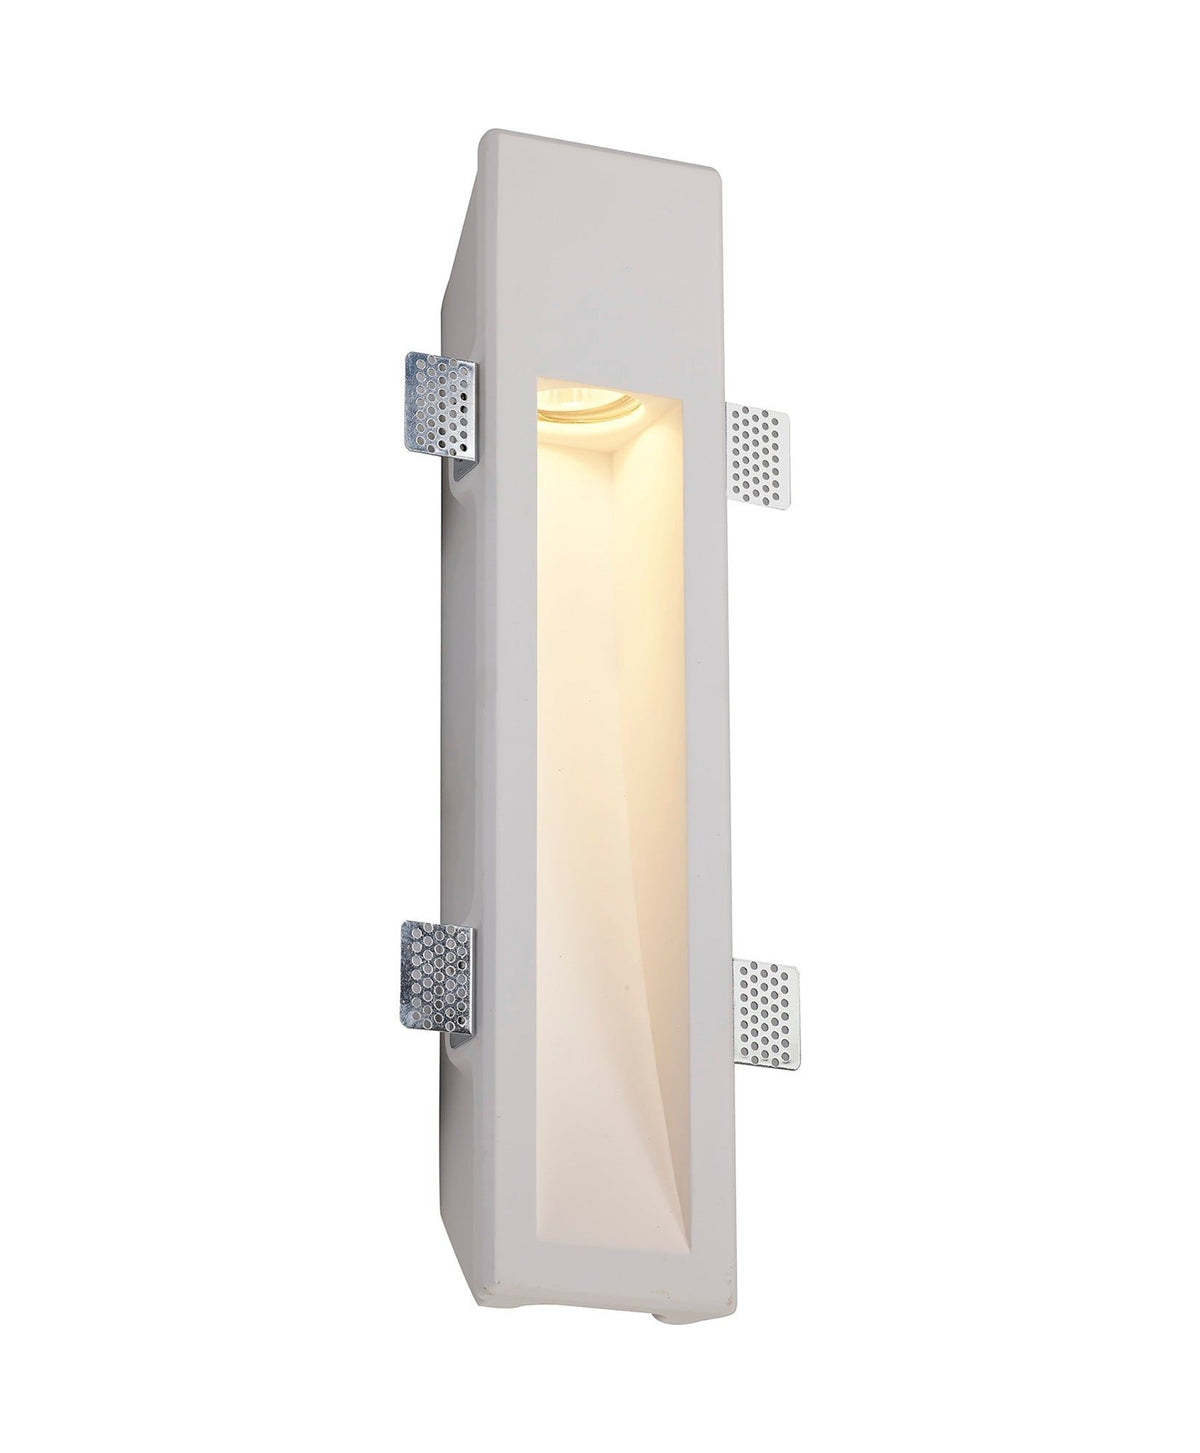 Adnonis Large Recessed Wall Lamp, 1 x GU10, White Paintable Gypsum, Cut Out: L:453mmxW:103mm